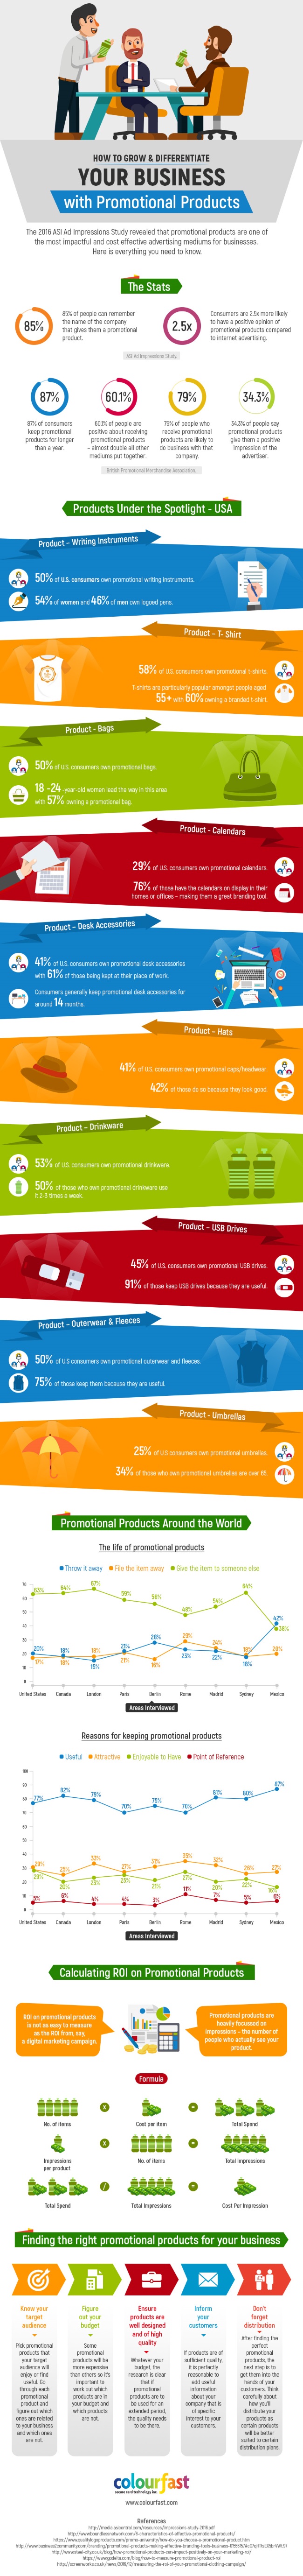 Promotional Products & Business Growth – Infographic